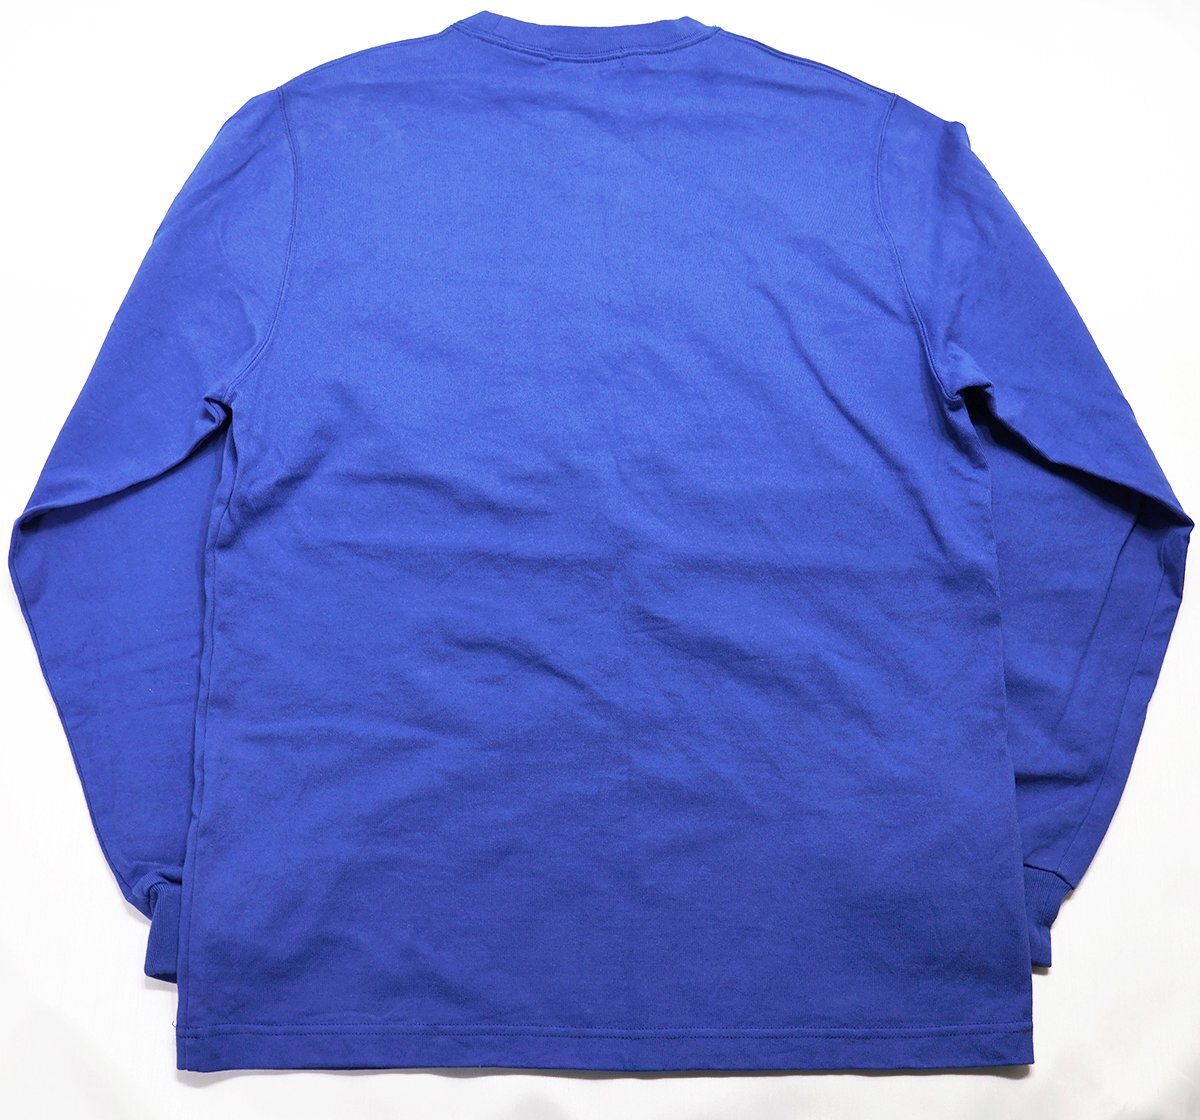 A DAY IN THE LIFE - UNITED ARROWS (ユナイテッドアローズ) Crew Neck L/S Tee / プレーン 長袖Tシャツ ブルー size L / ロンTの画像2